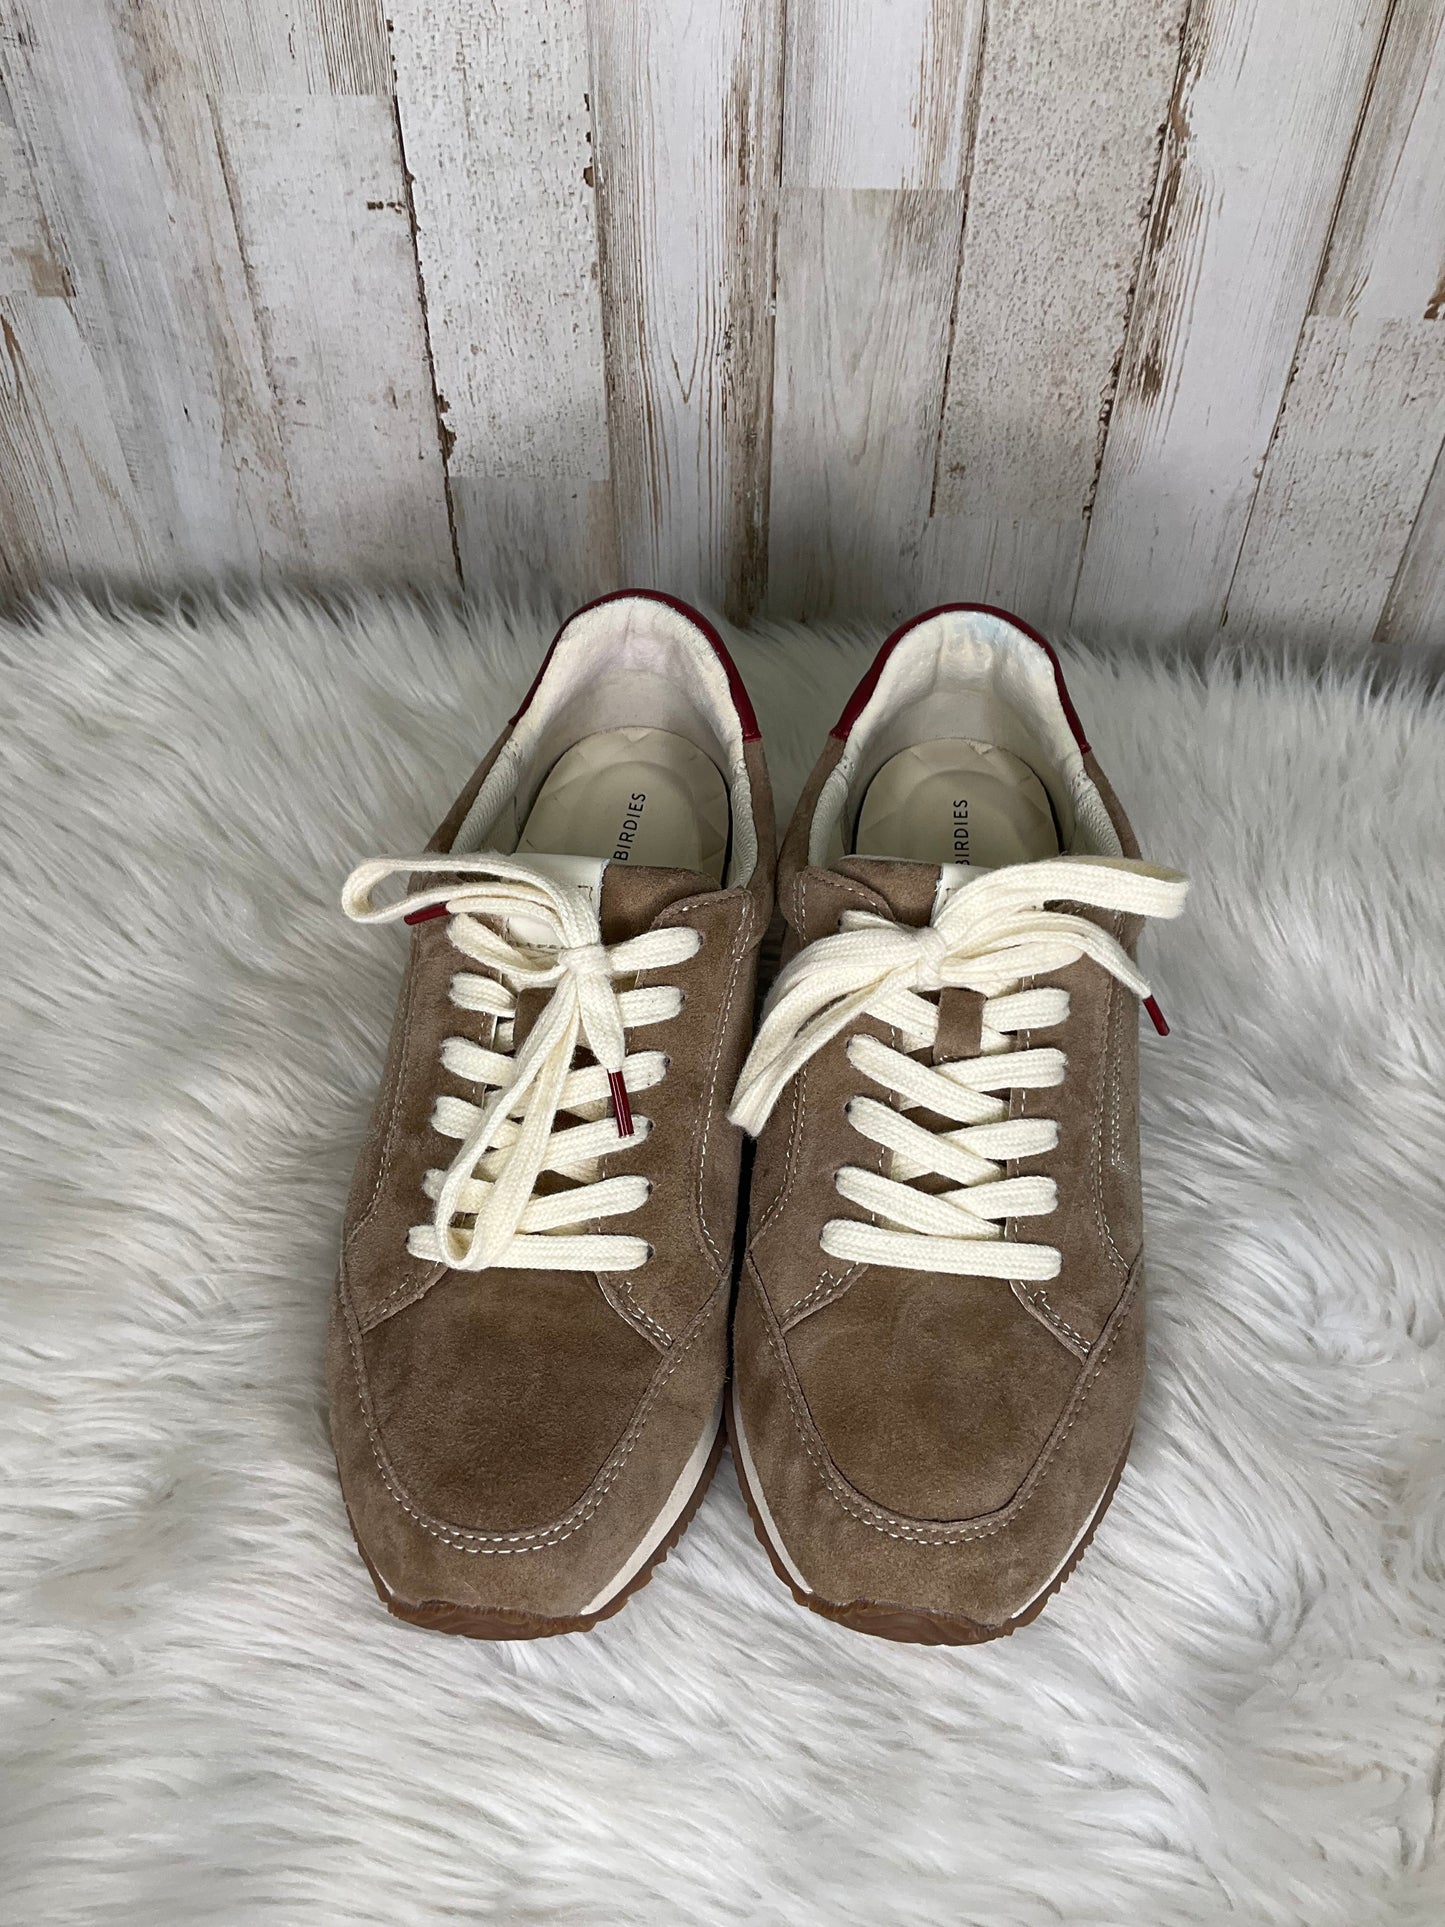 Brown Shoes Sneakers Cmc, Size 8.5